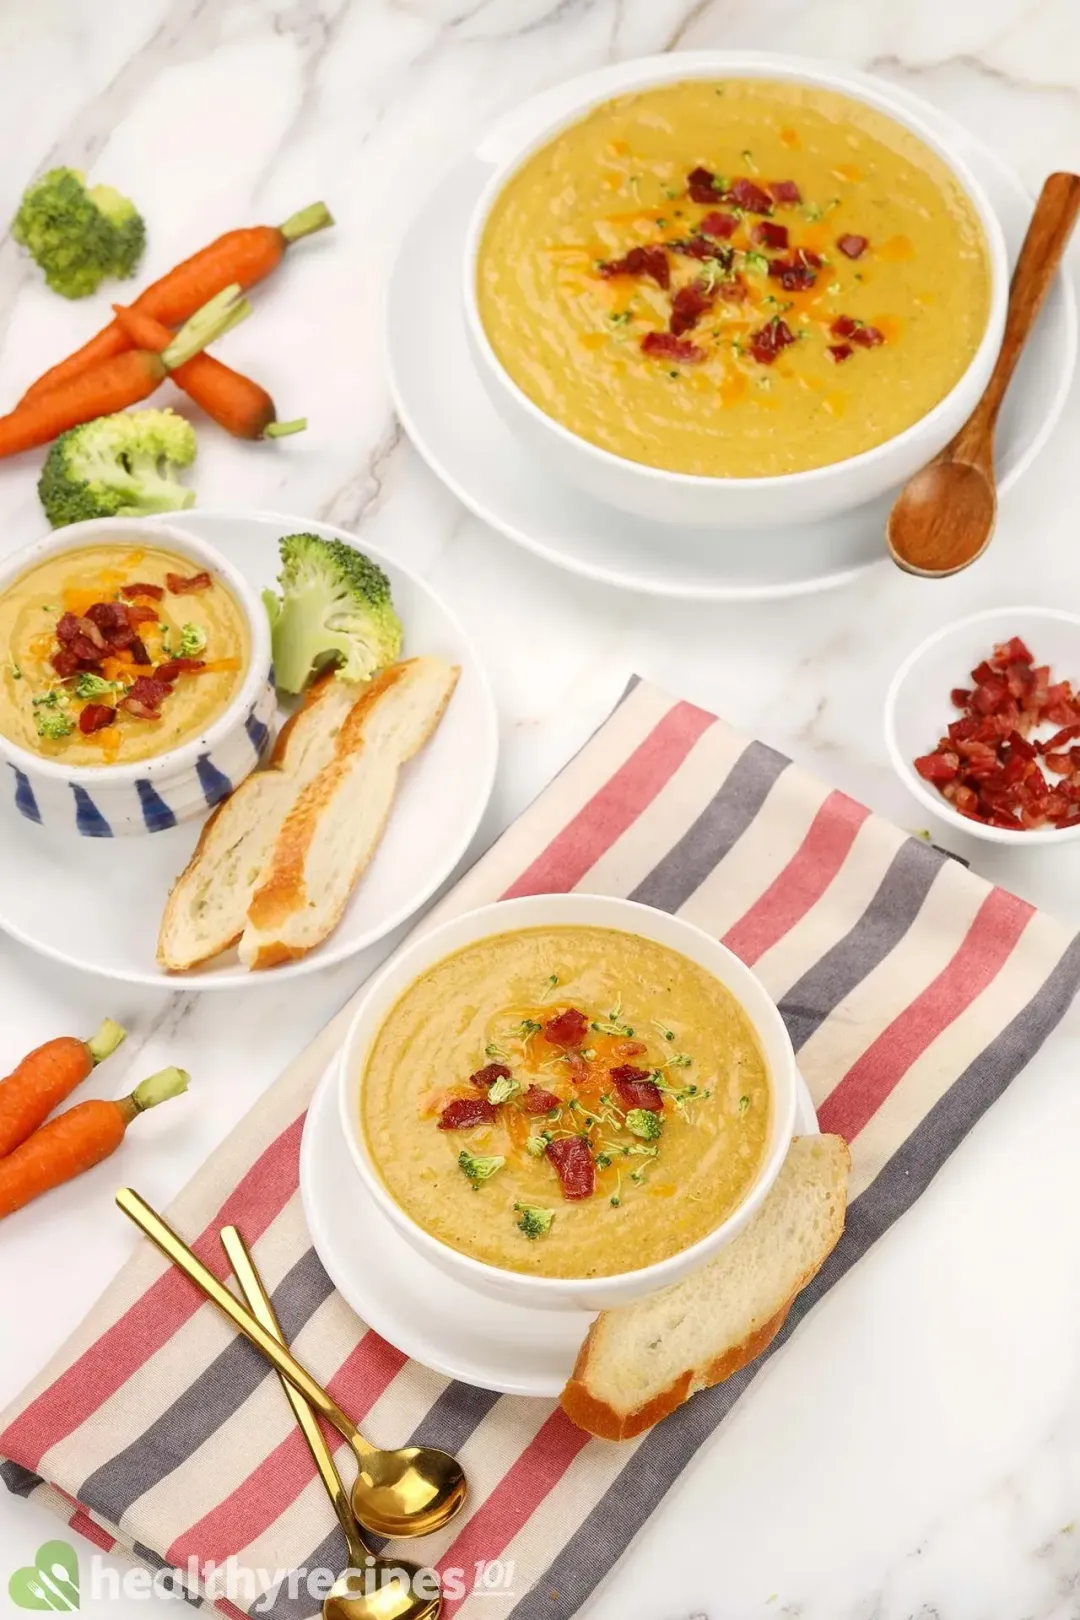 how to store and reaheat broccoli cheddar soup